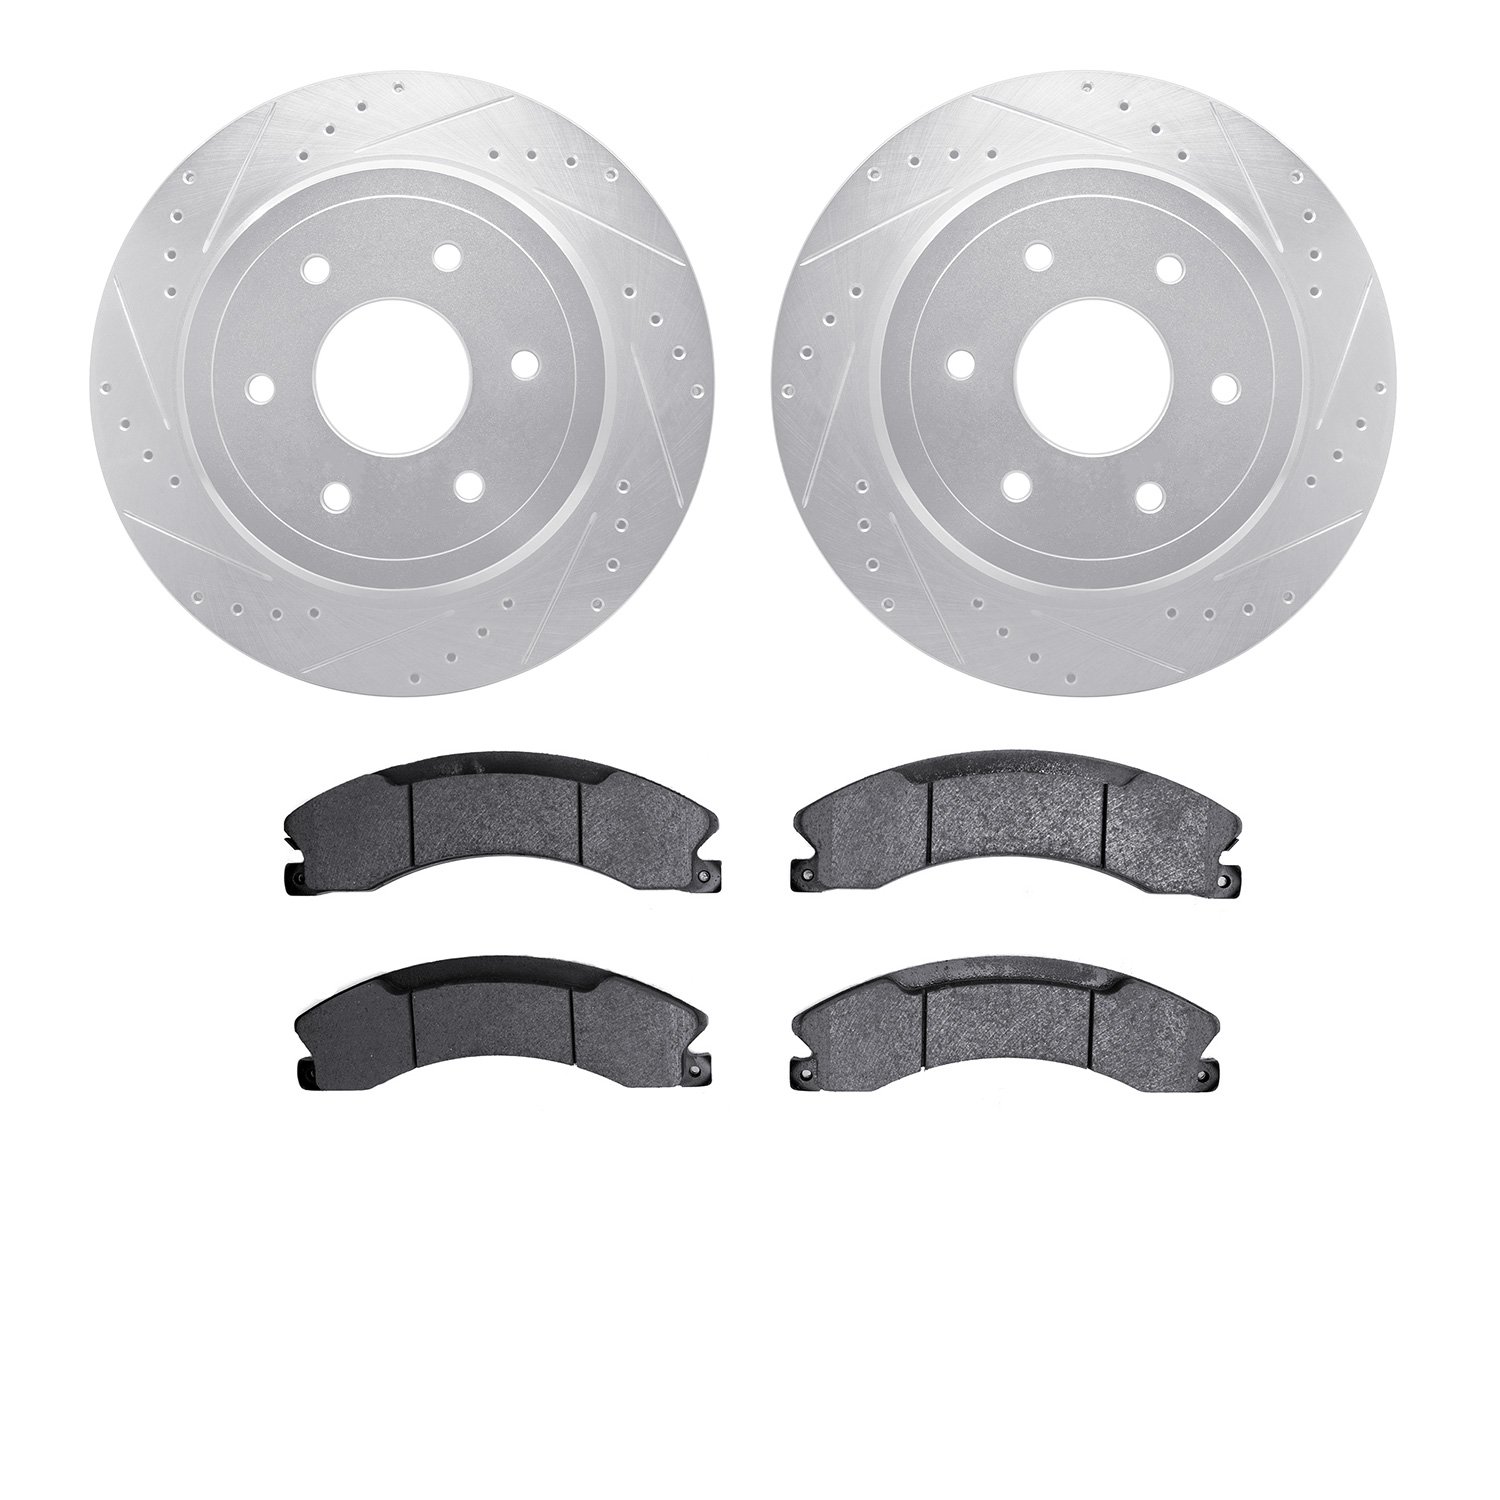 7402-67009 Drilled/Slotted Brake Rotors with Ultimate-Duty Brake Pads Kit [Silver], Fits Select Infiniti/Nissan, Position: Rear